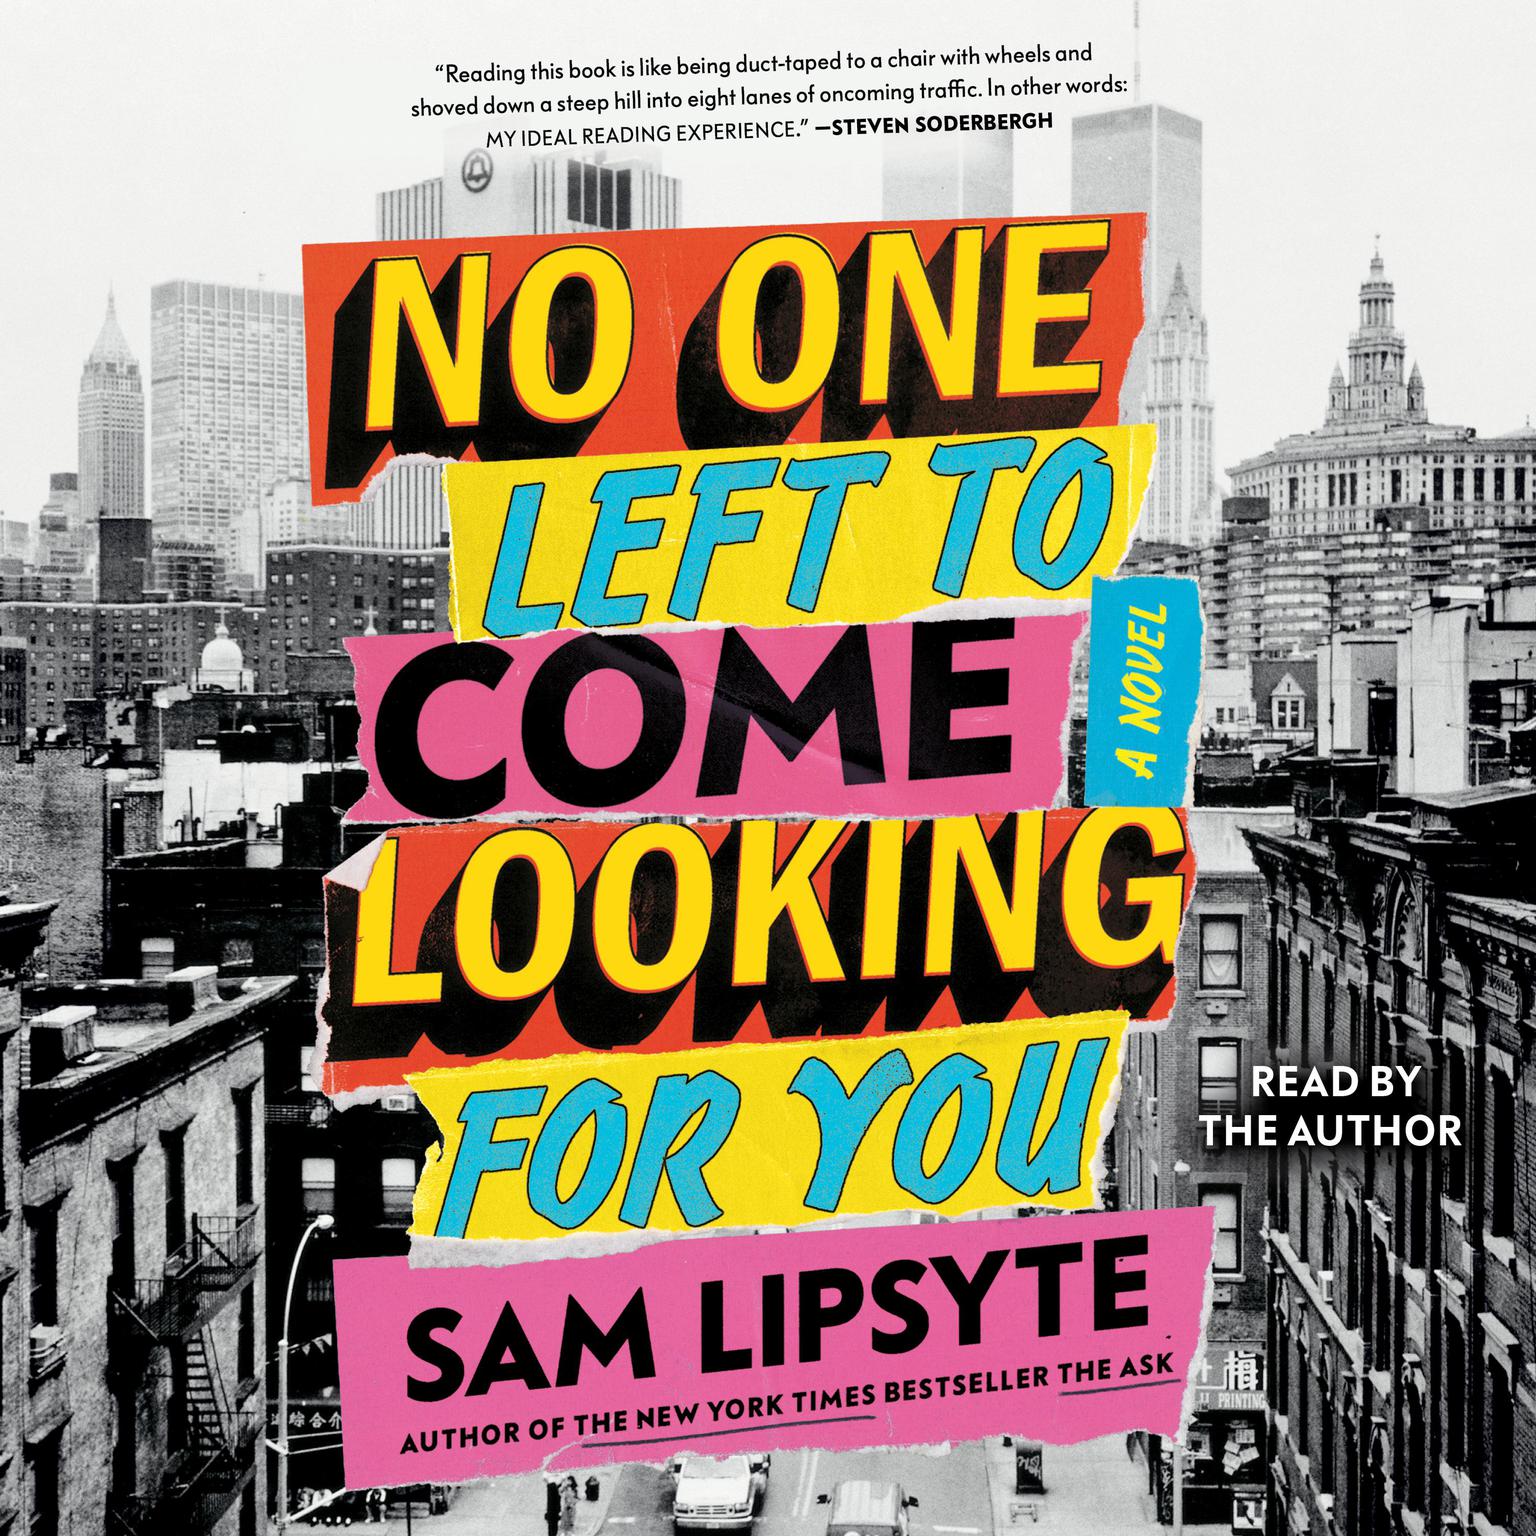 No One Left to Come Looking for You: A Novel Audiobook, by Sam Lipsyte